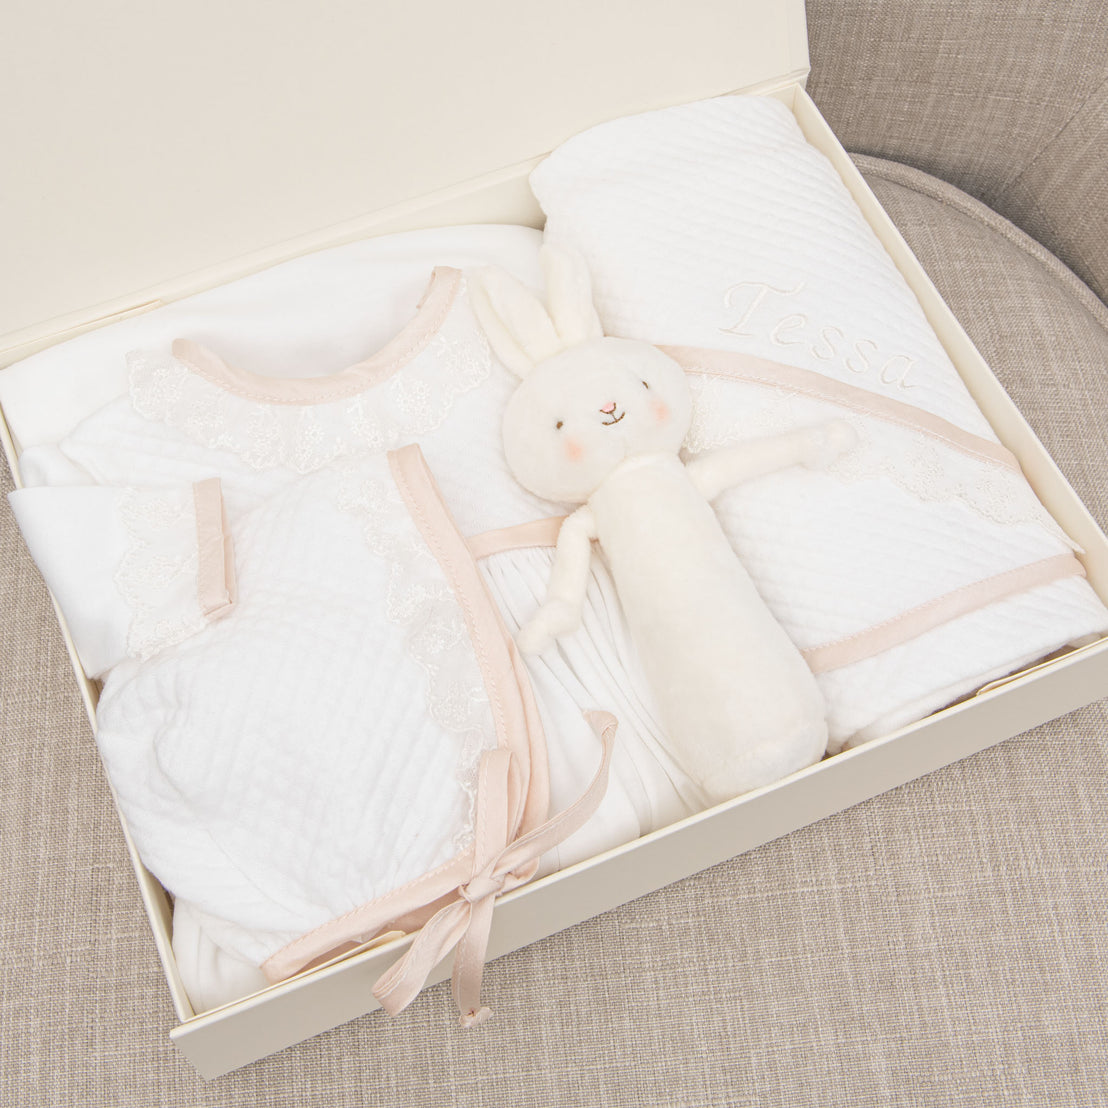 Photo showcasing what is in the Tessa Newborn Gift Set, including the Layette Gown, Bonnet, Bunny Chime, Blanket and Gift Box.